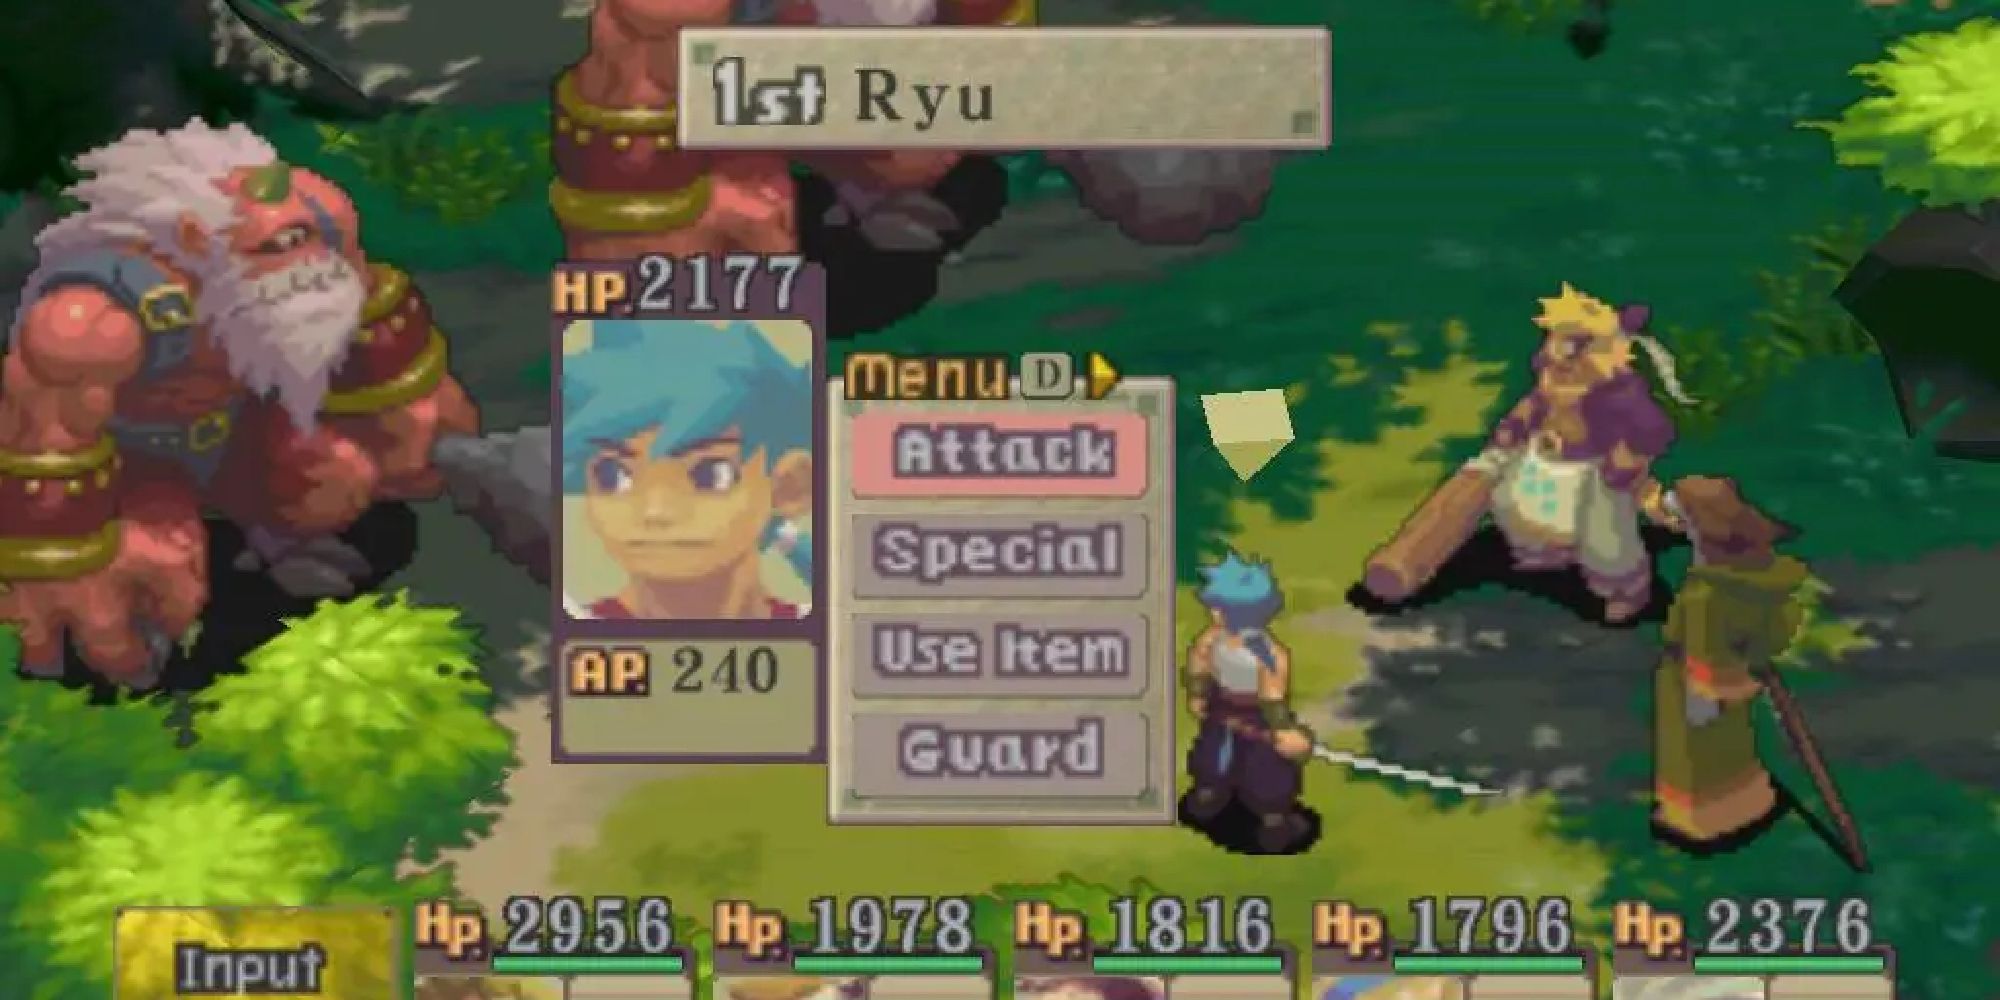 A battle scene in Breath of Fire IV, showing Ryu selecting an attack move